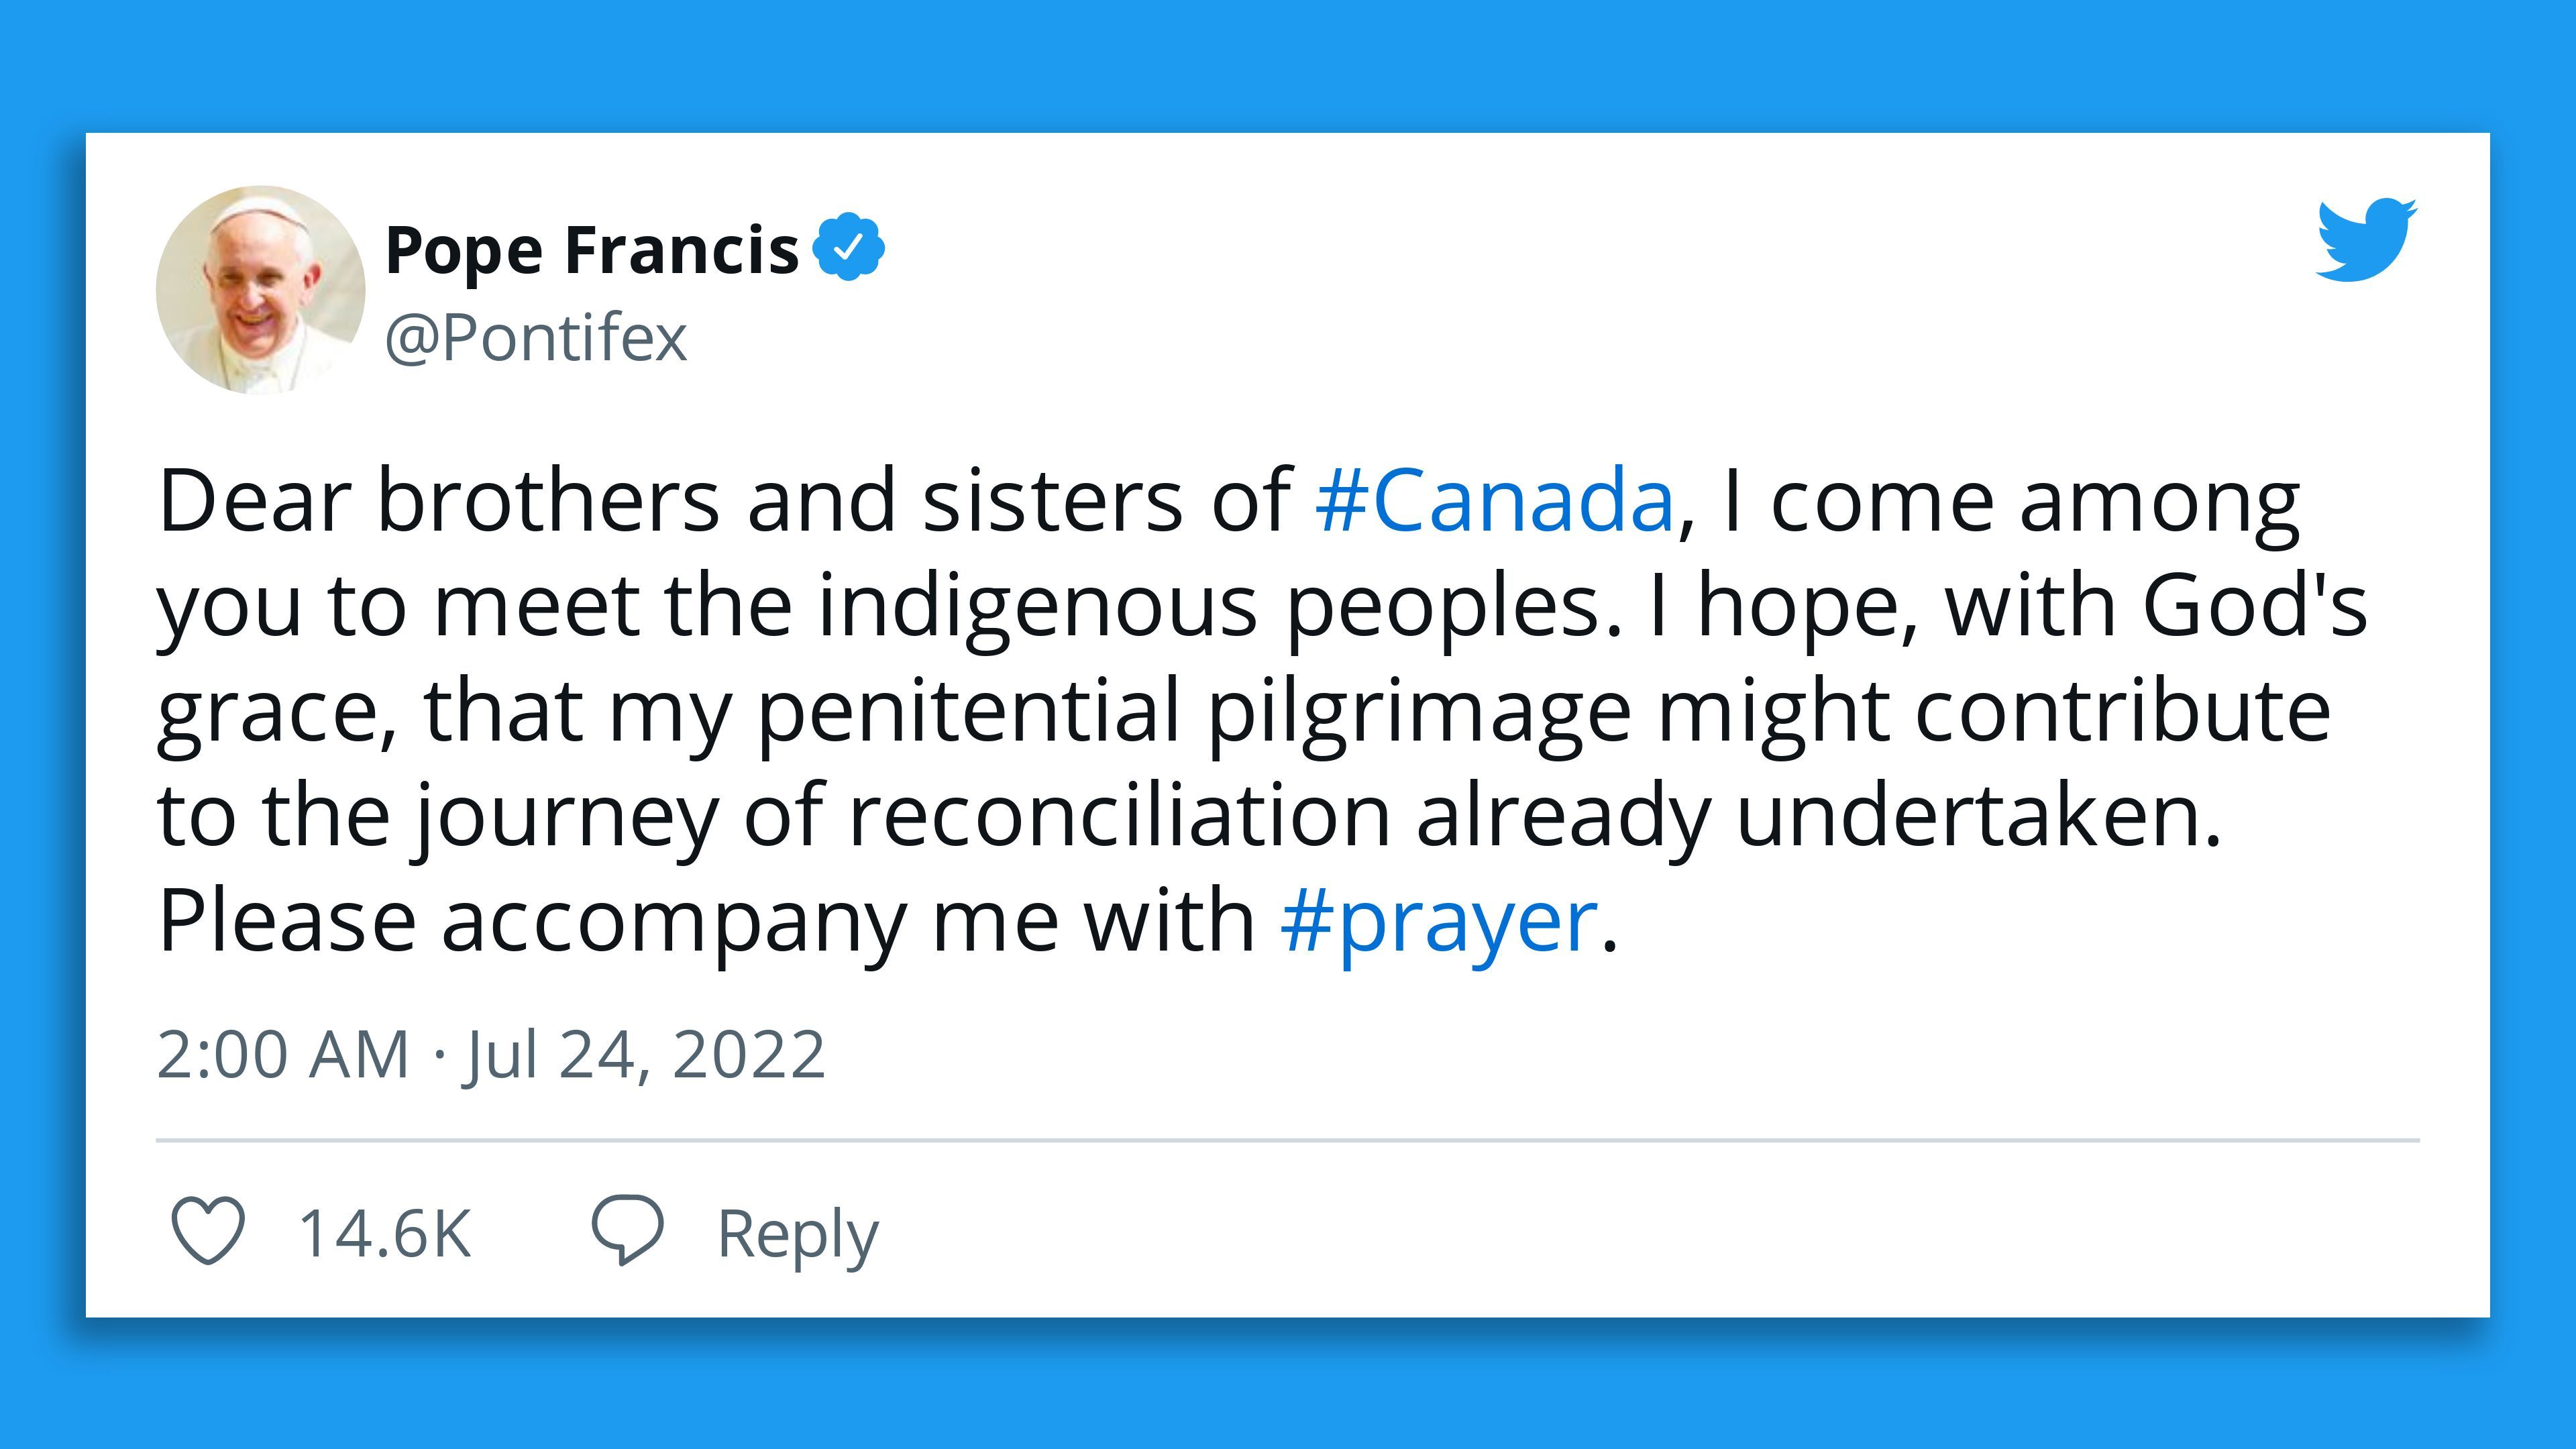 A screenshot of Pope Francis' tweet expressing hope "that my penitential pilgrimage might contribute to the journey of reconciliation already undertaken."